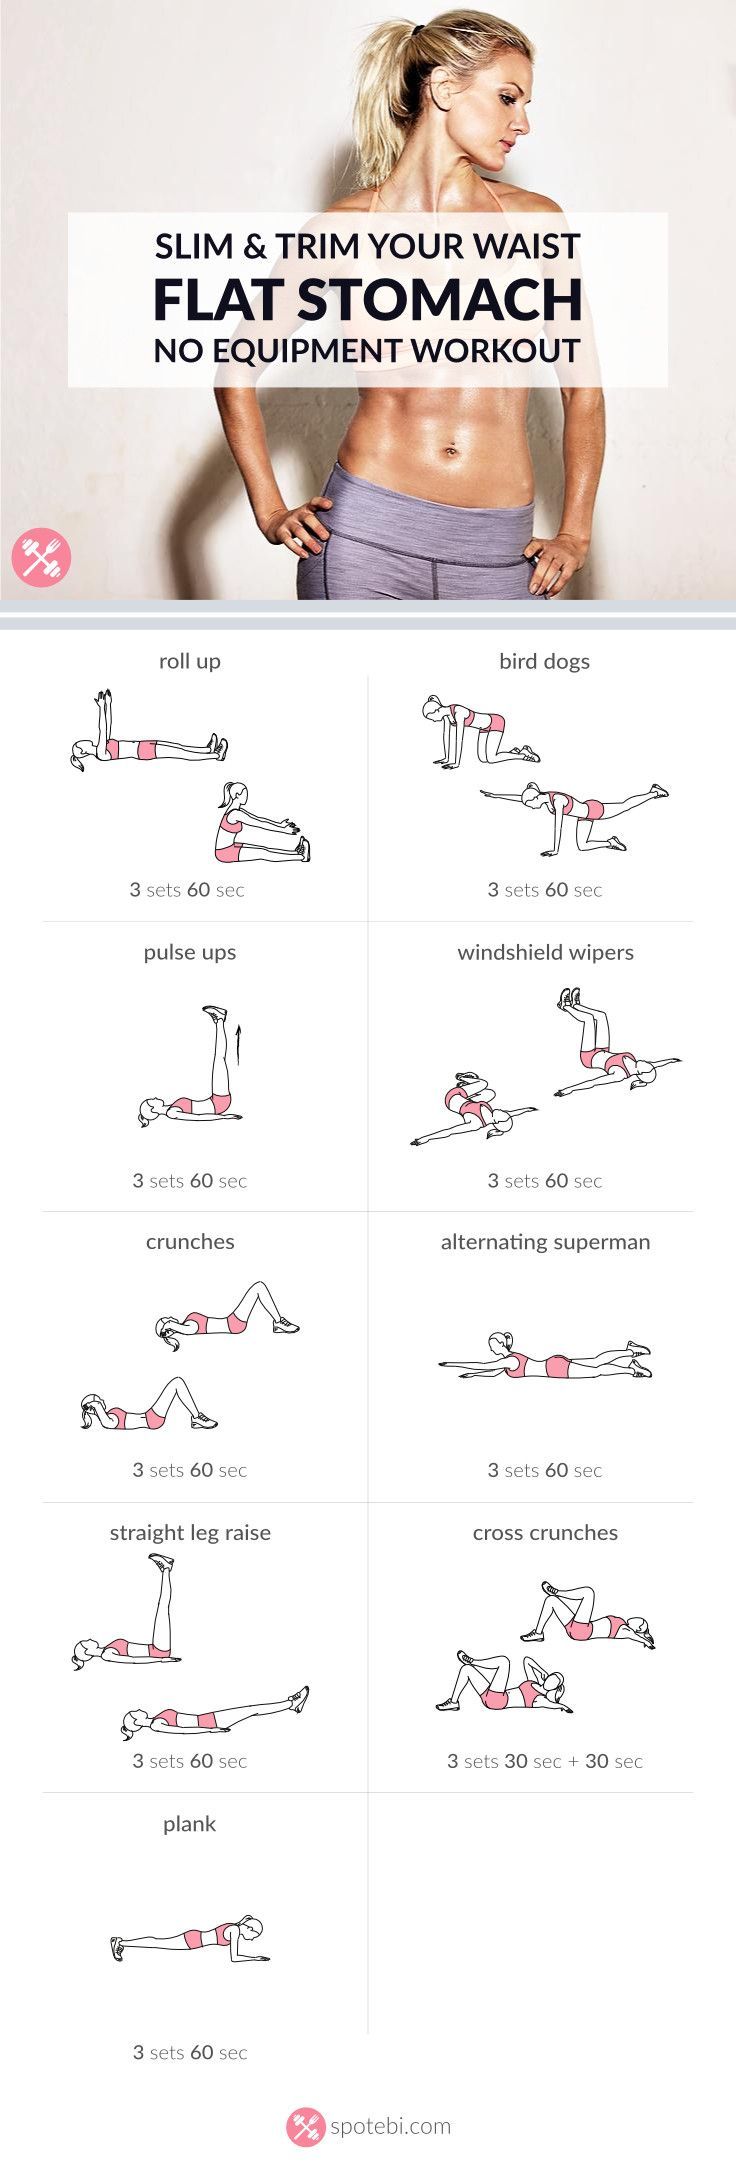 Flat Stomach ab workout with no equipment. Each execise 60 sec & 60 sec rest,